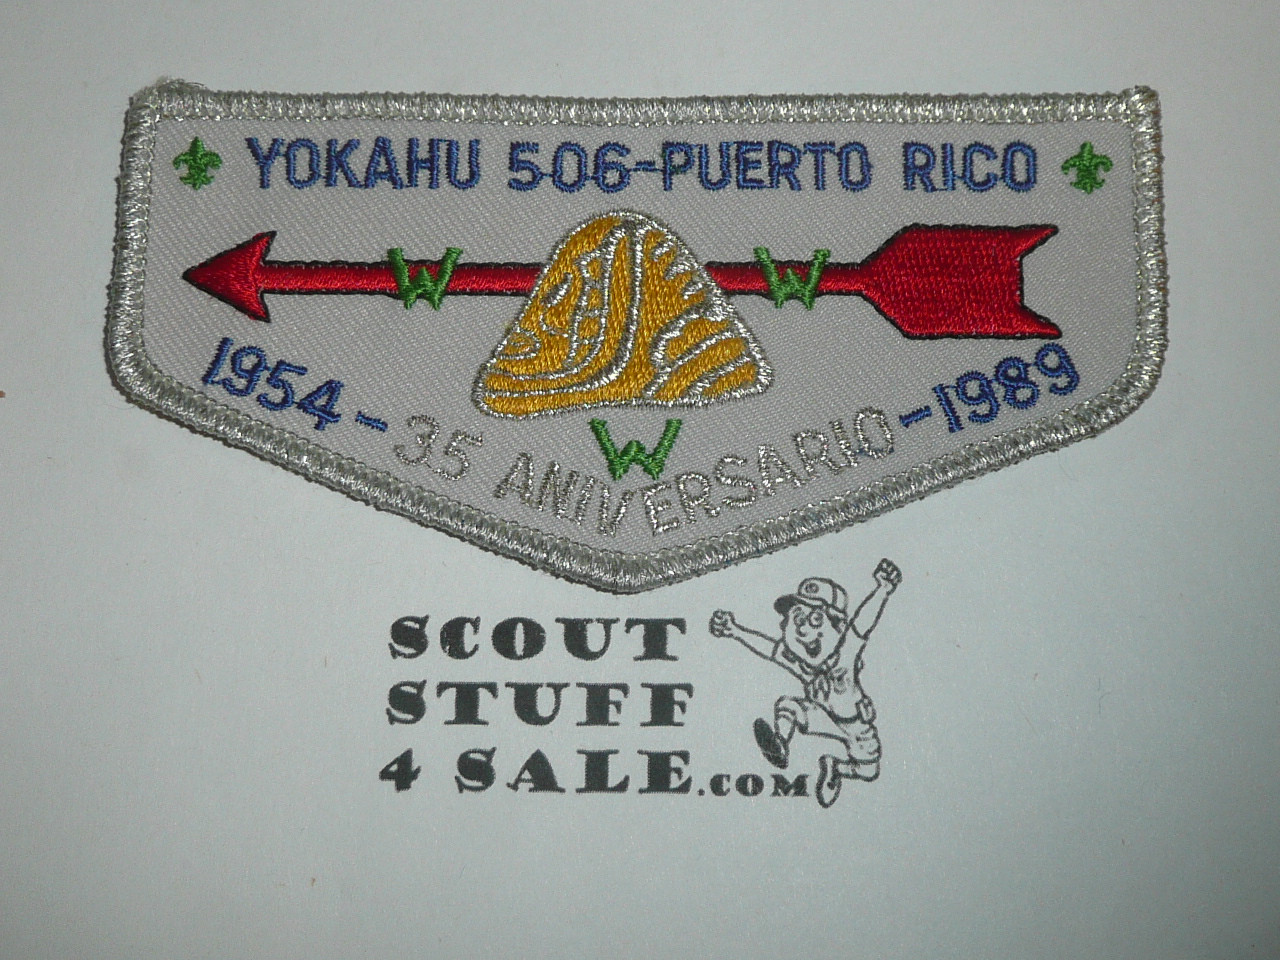 Order of the Arrow Lodge #506 Yokahu qf1 35th Anniversary Flap Patch, rejected by lodge